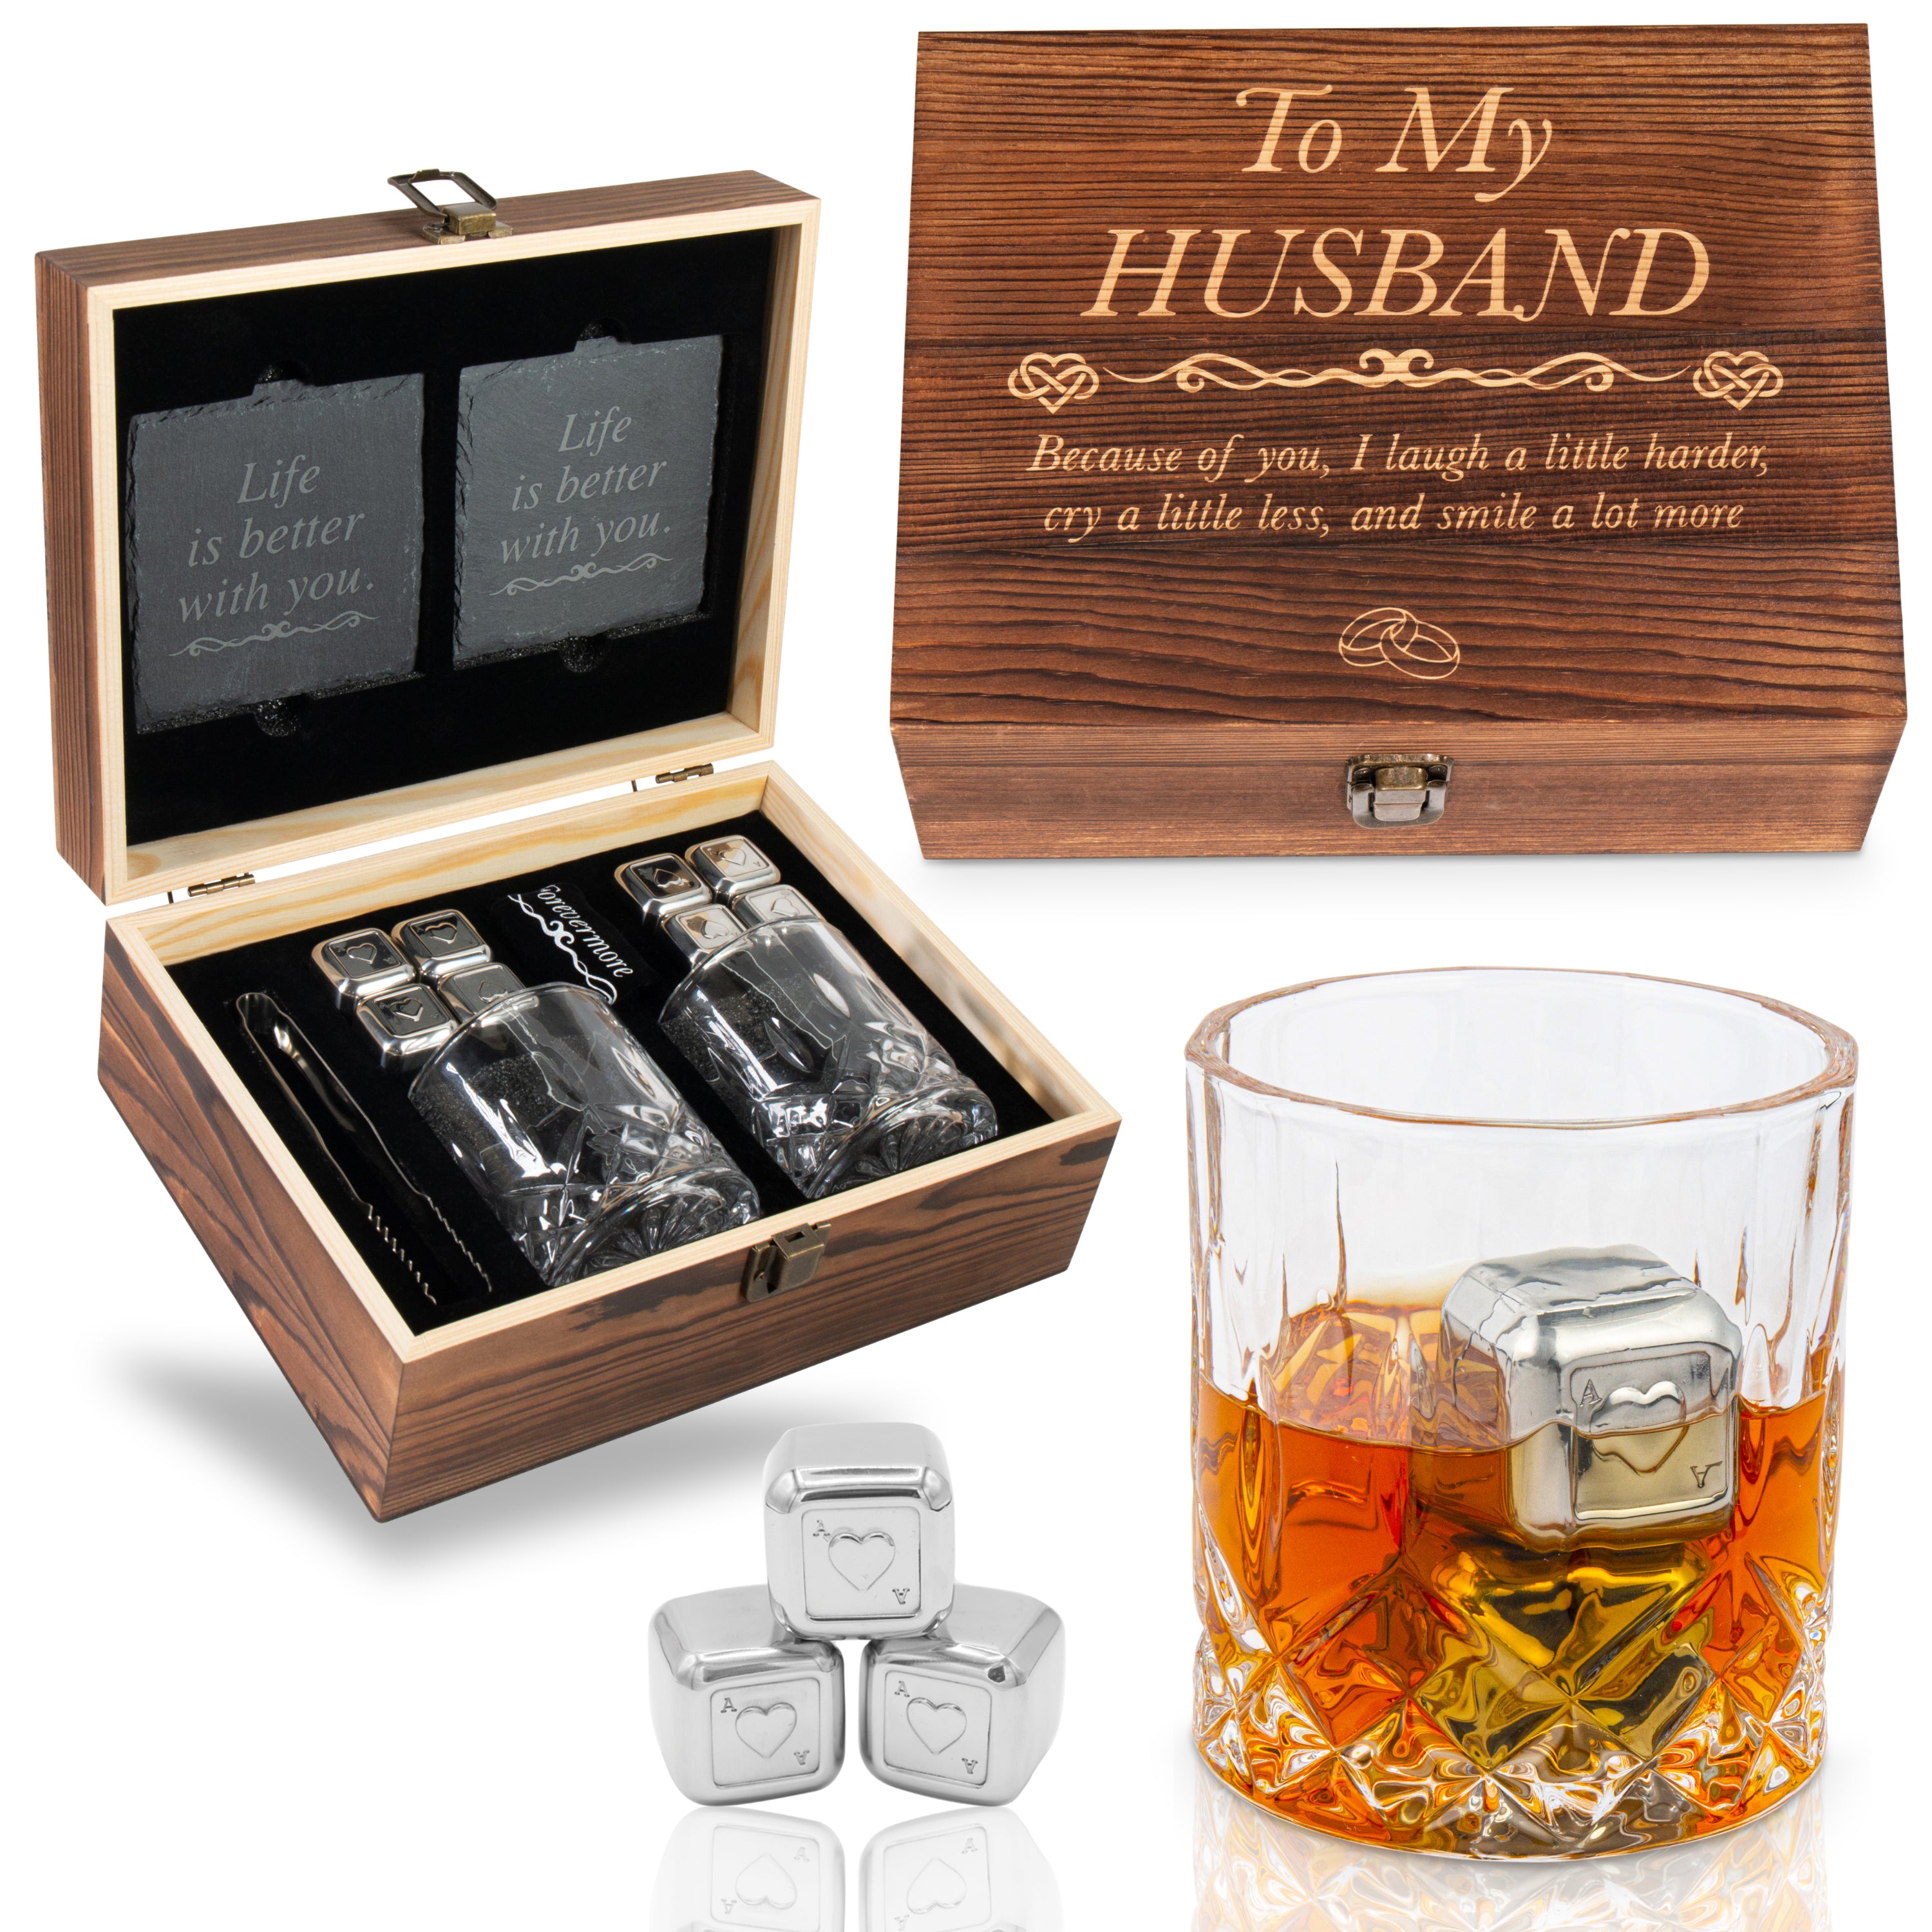 The Perfect Gift For Your Husband-  "To My Husband" Whisky Glass Gift Set